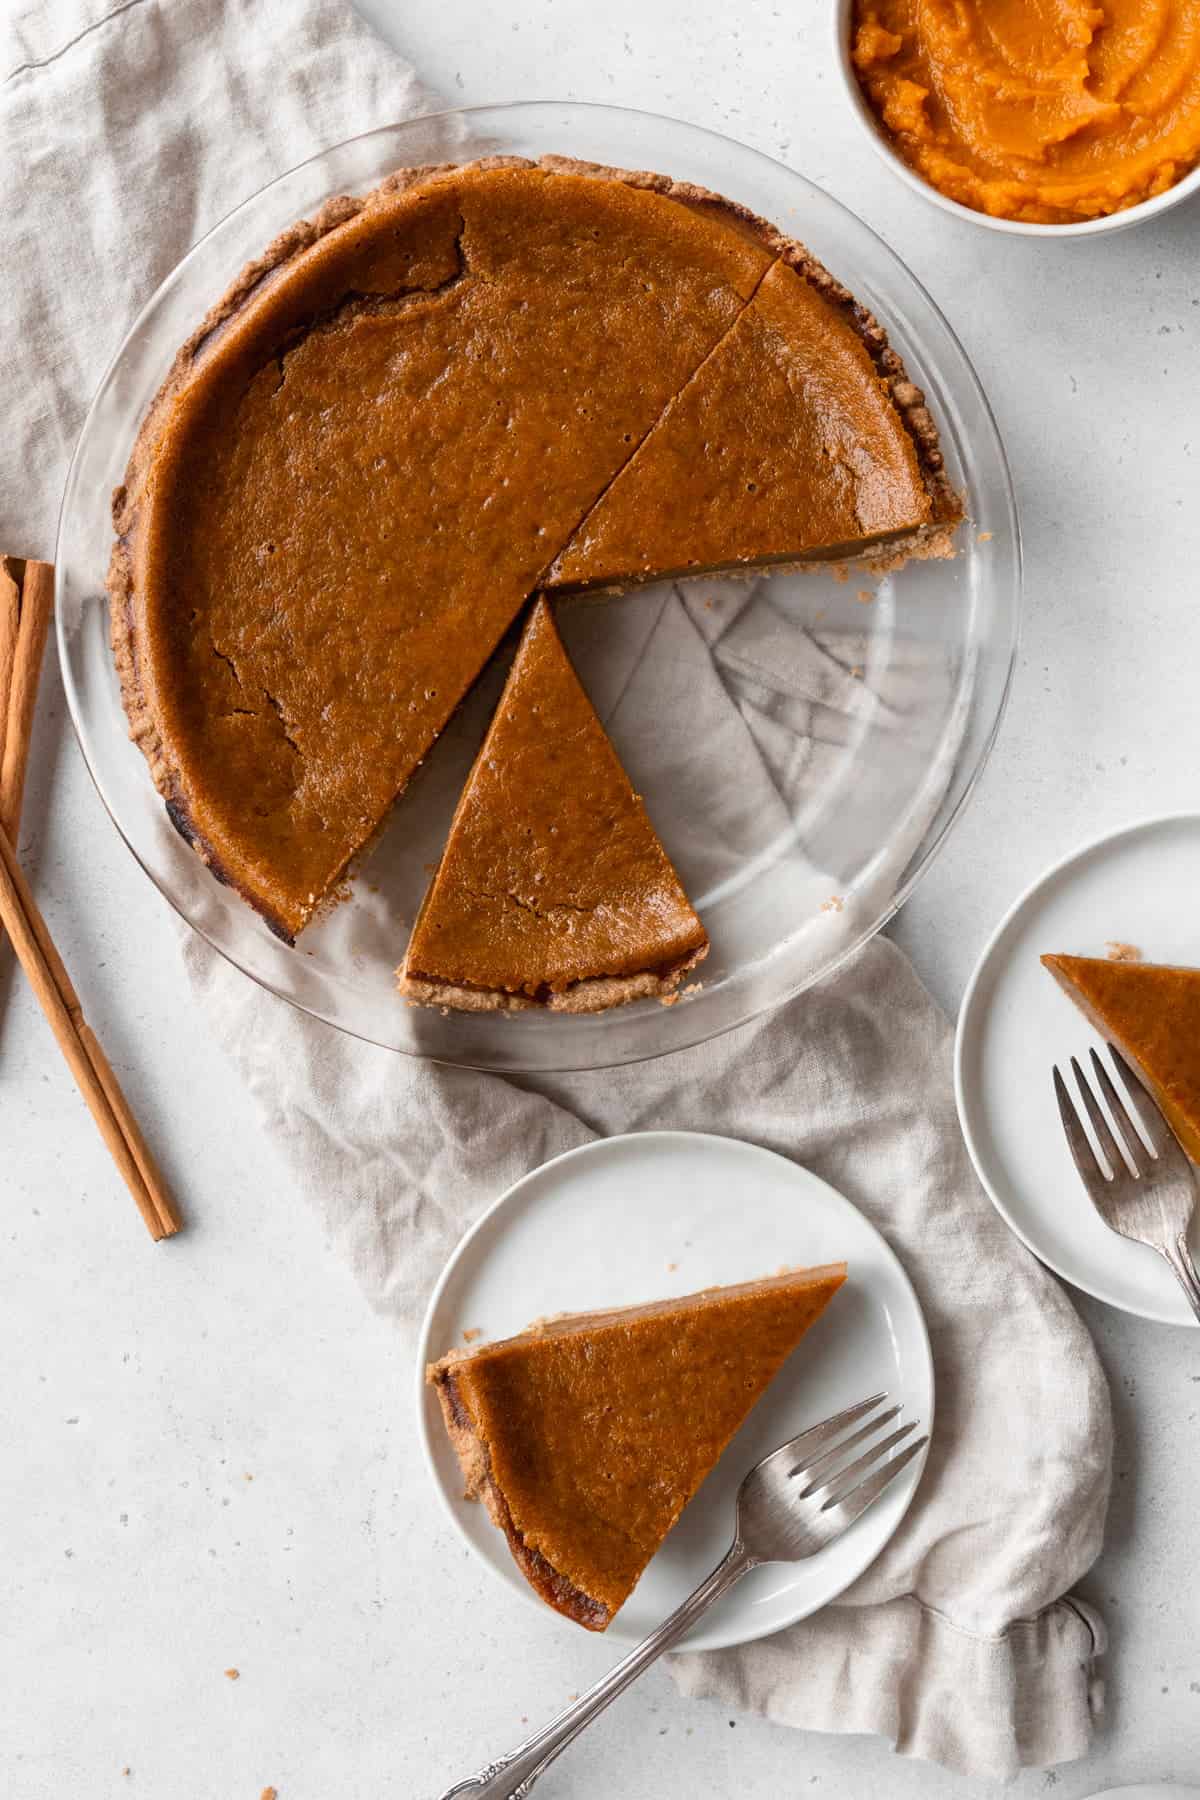 A sliced egg-free pumpkin pie on a natural linen with small plates of pie slices placed next to it.